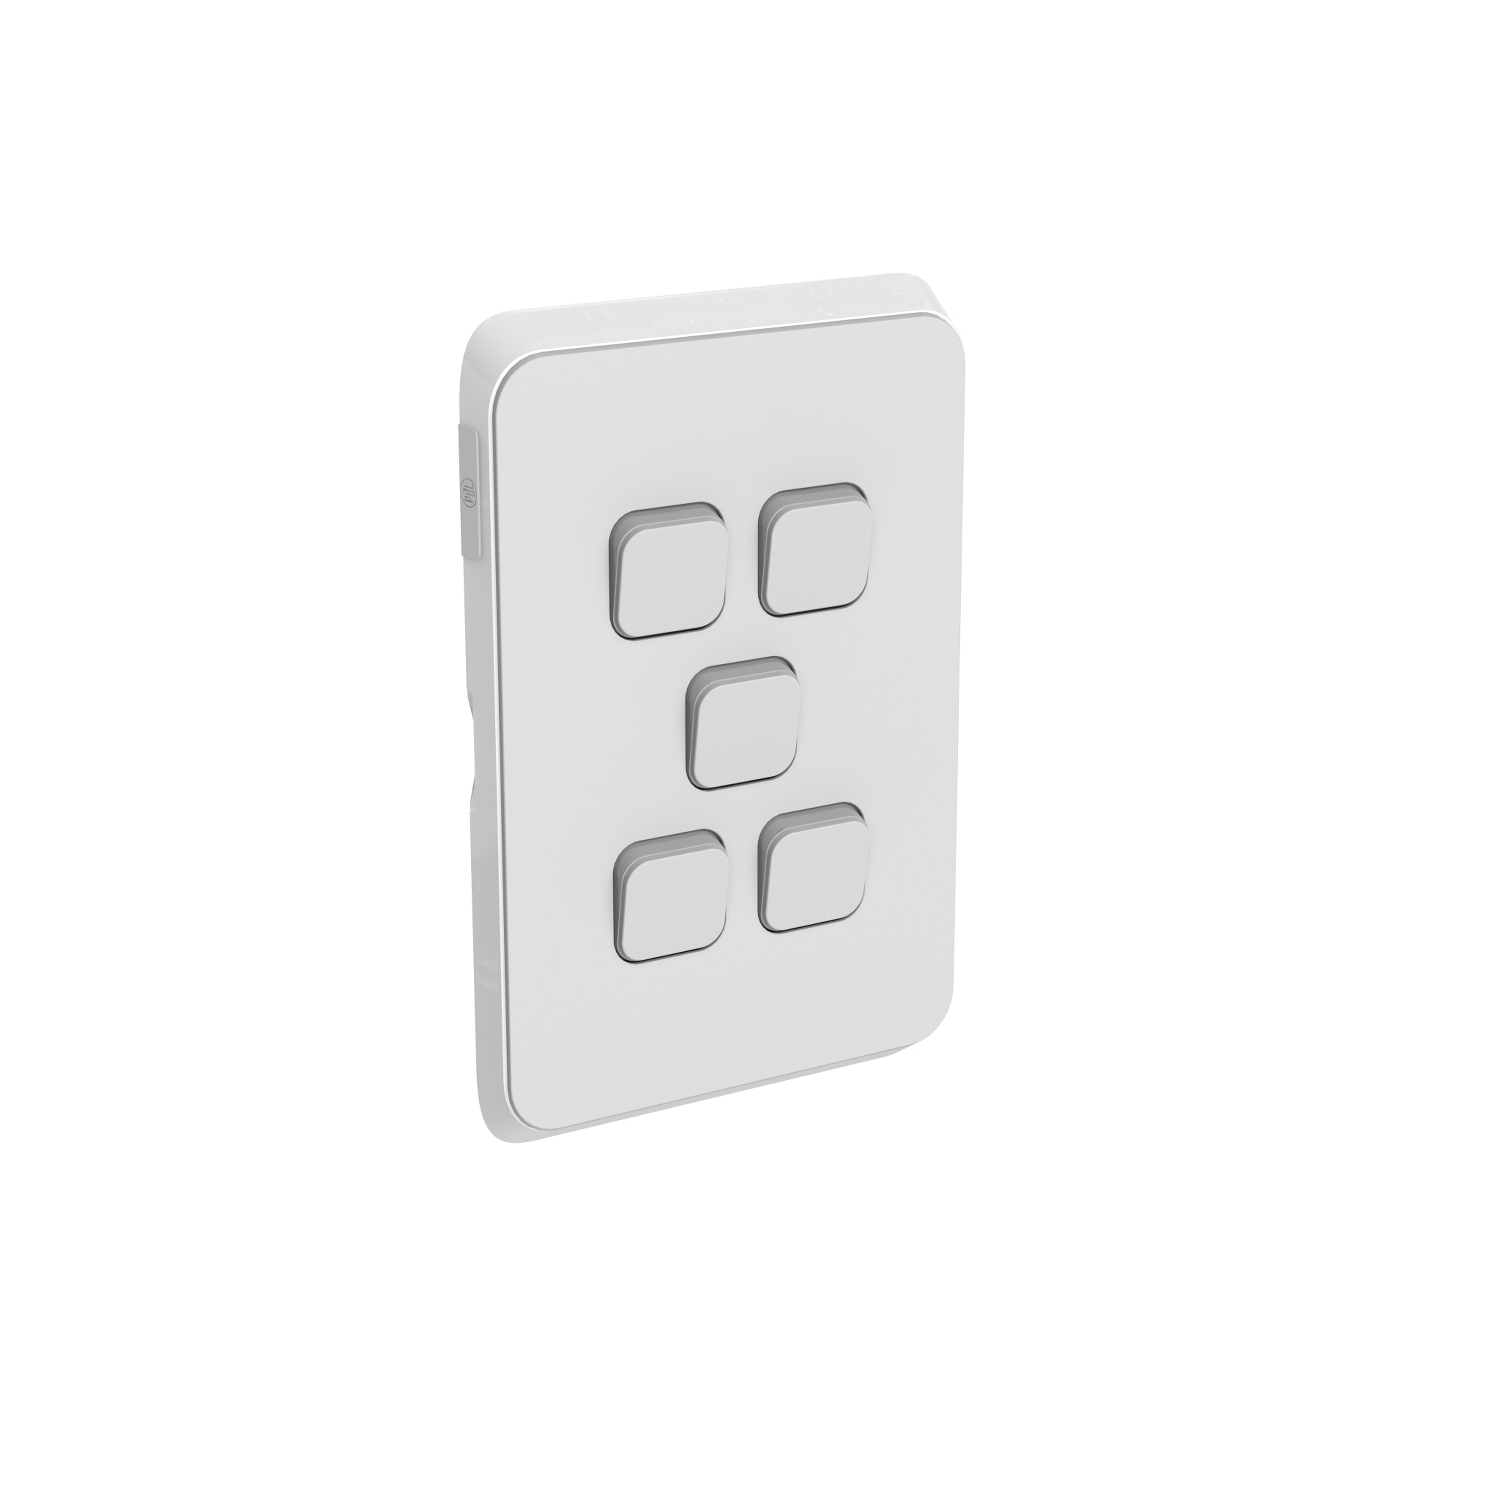 PDL385C-CY - PDL Iconic Cover Plate Switch 5Gang - Cool Grey